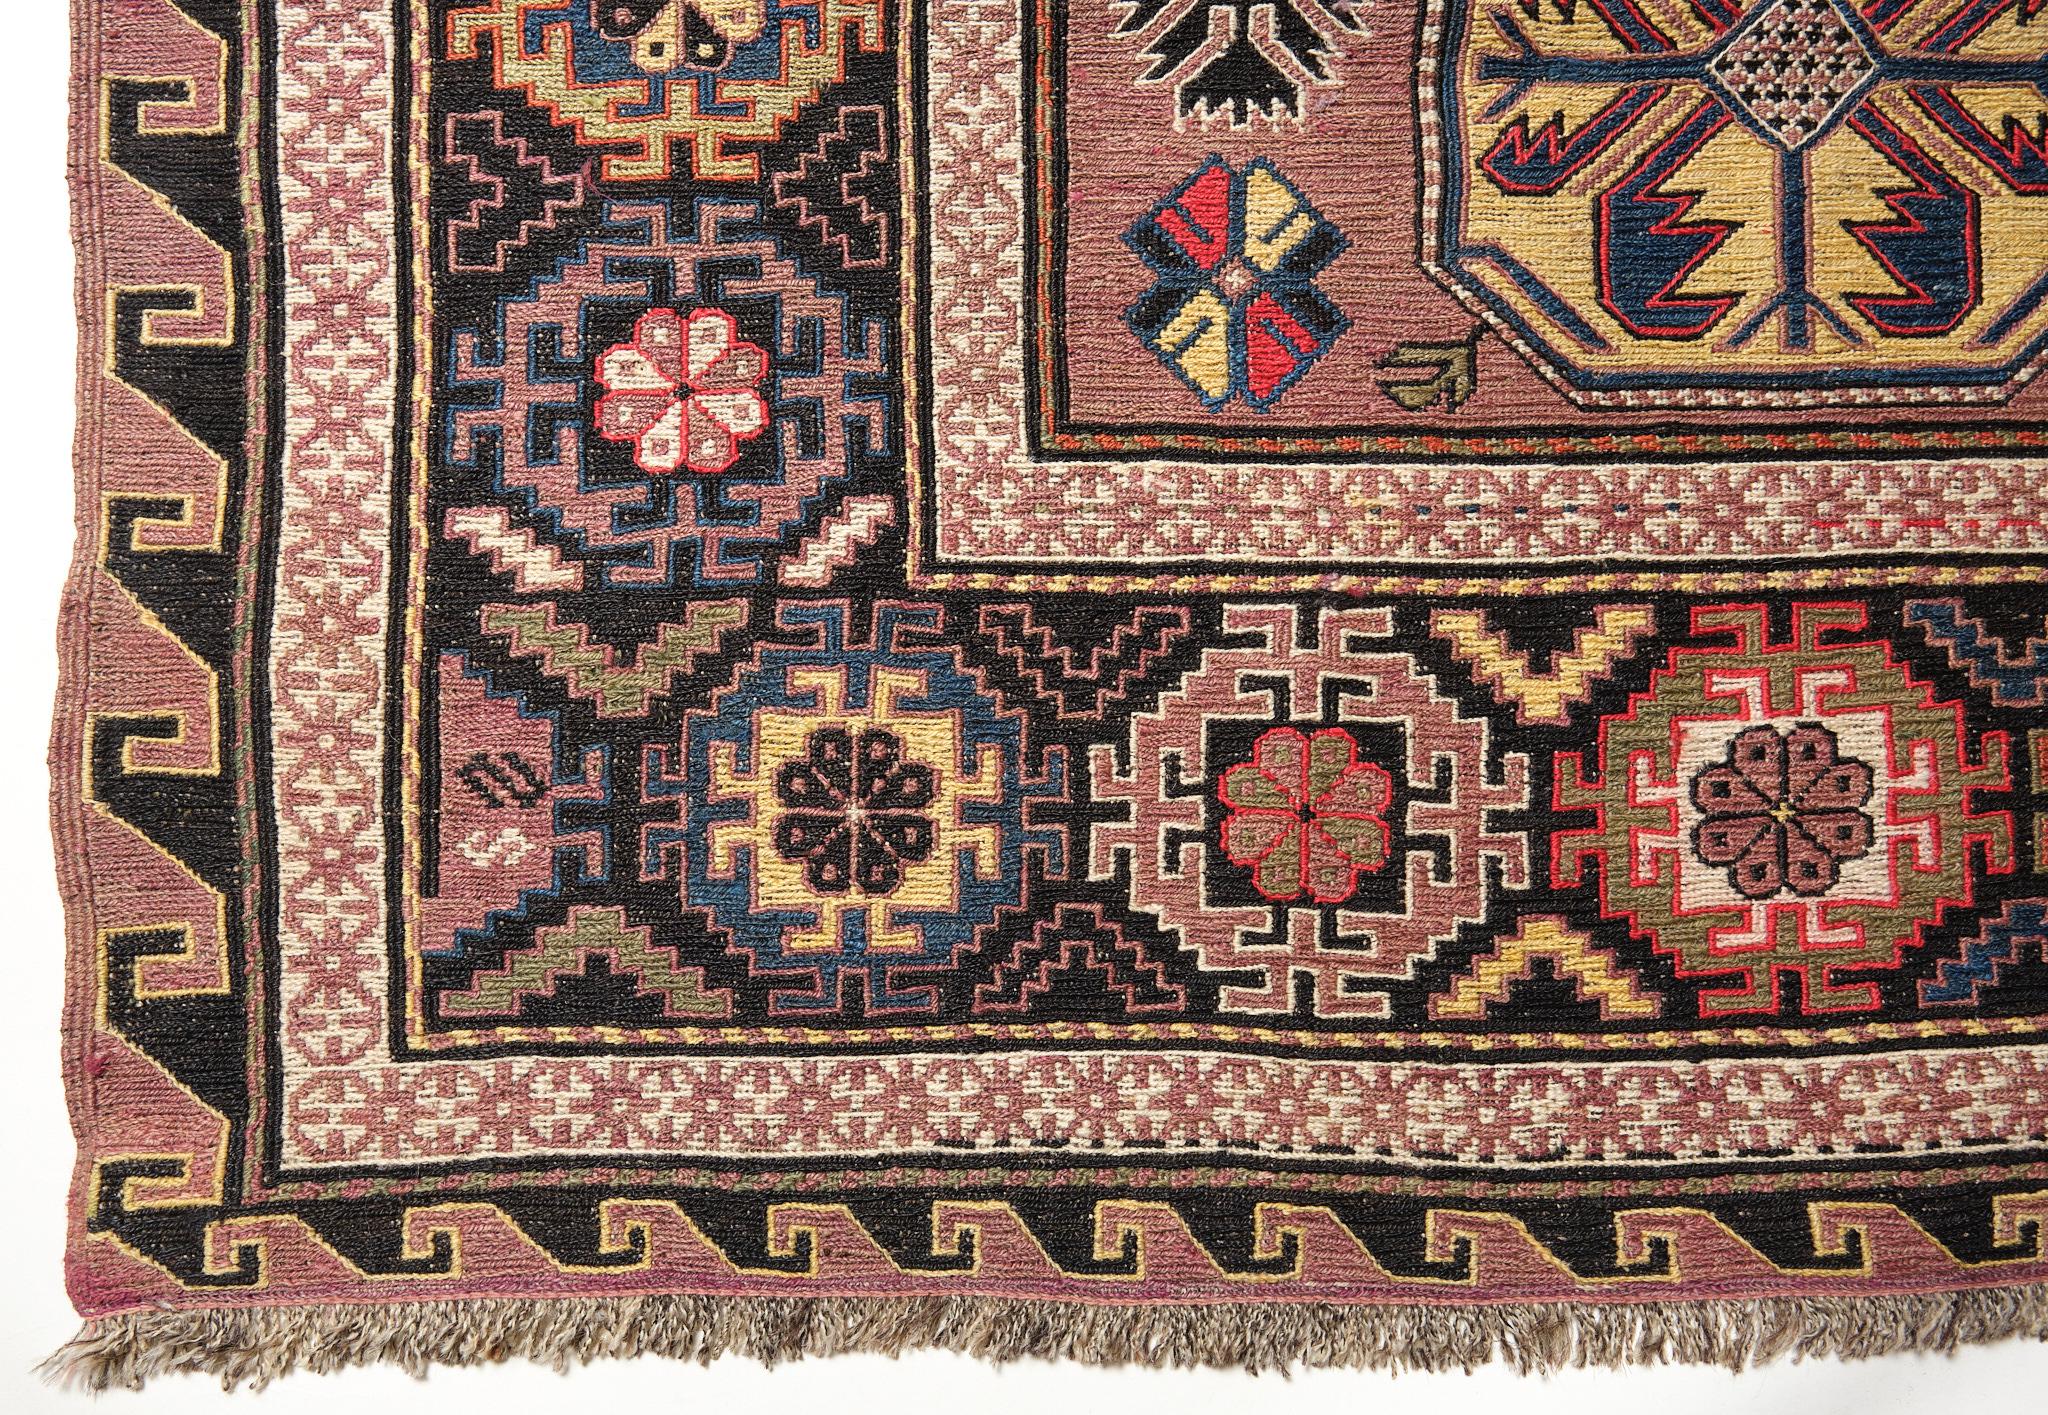 This is a large Antique Soumak ( Sumak, Sumac ) Kilim from the Caucasus region with a rare and beautiful color composition.

Of the four countries that make up the Caucasus, Azerbaijan produces the most kilims, and the land has a long history of